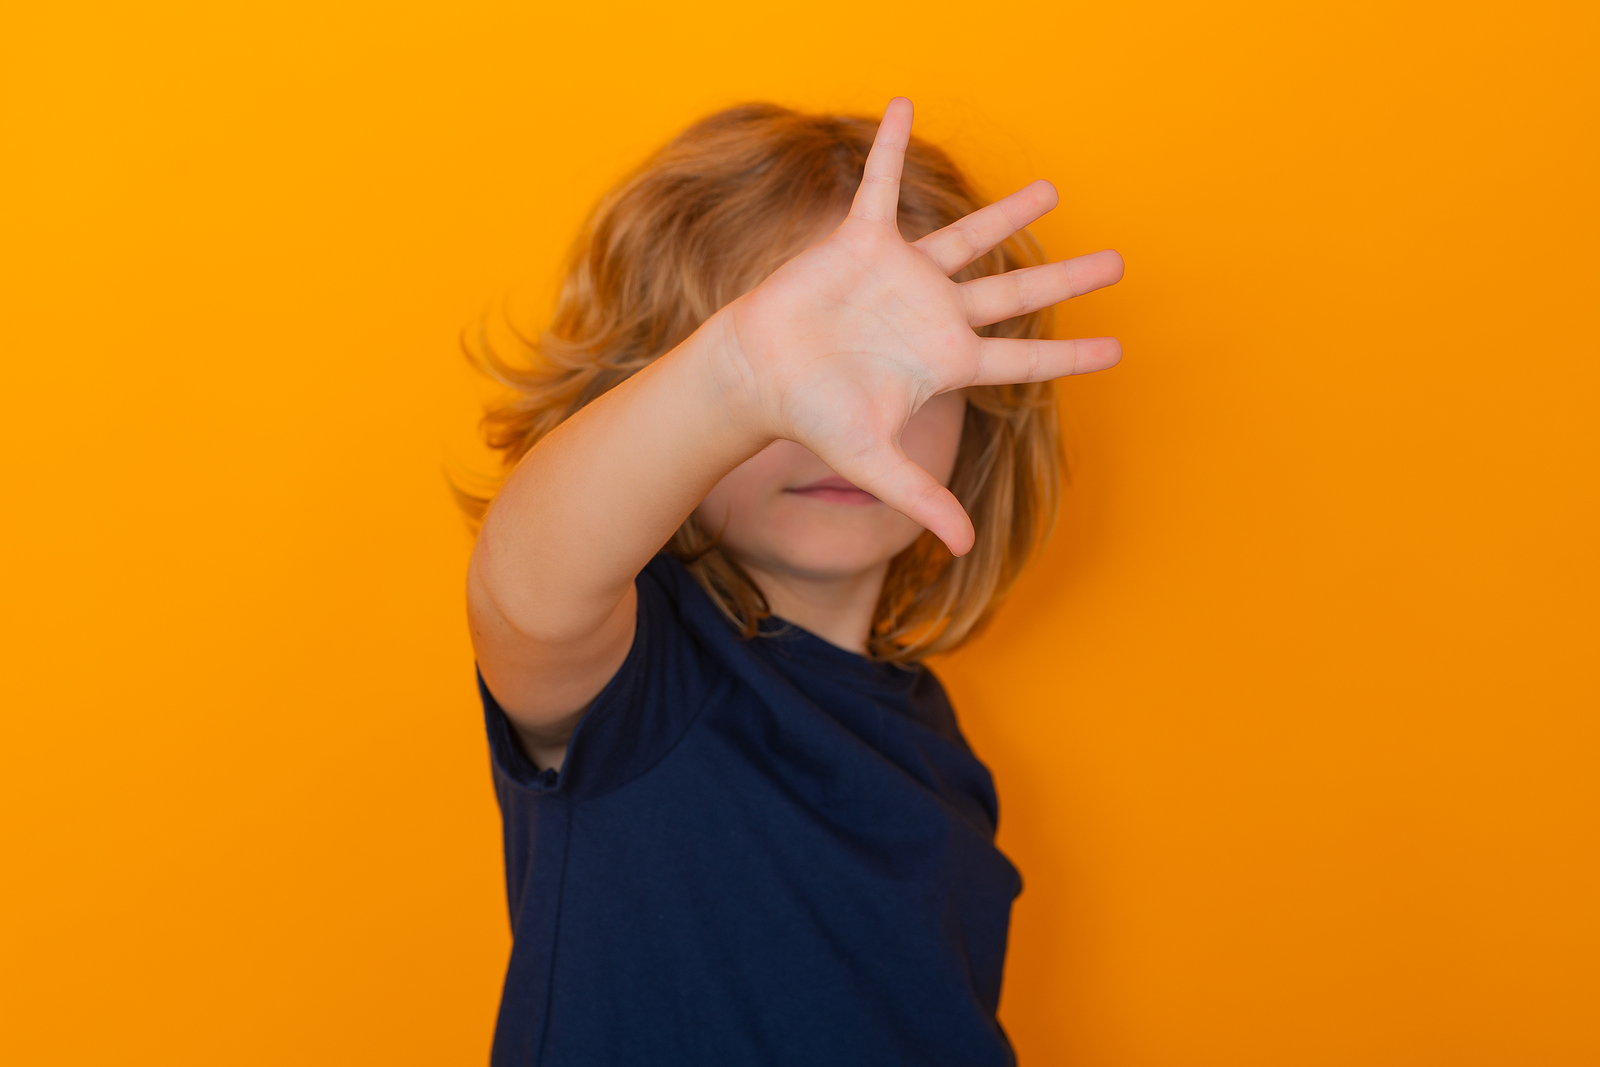 Child makes a stop gesture on an orange background. ADHD testing in the San Francisco areas is just what your child needs to thrive! Learn more about ADHD testing here.